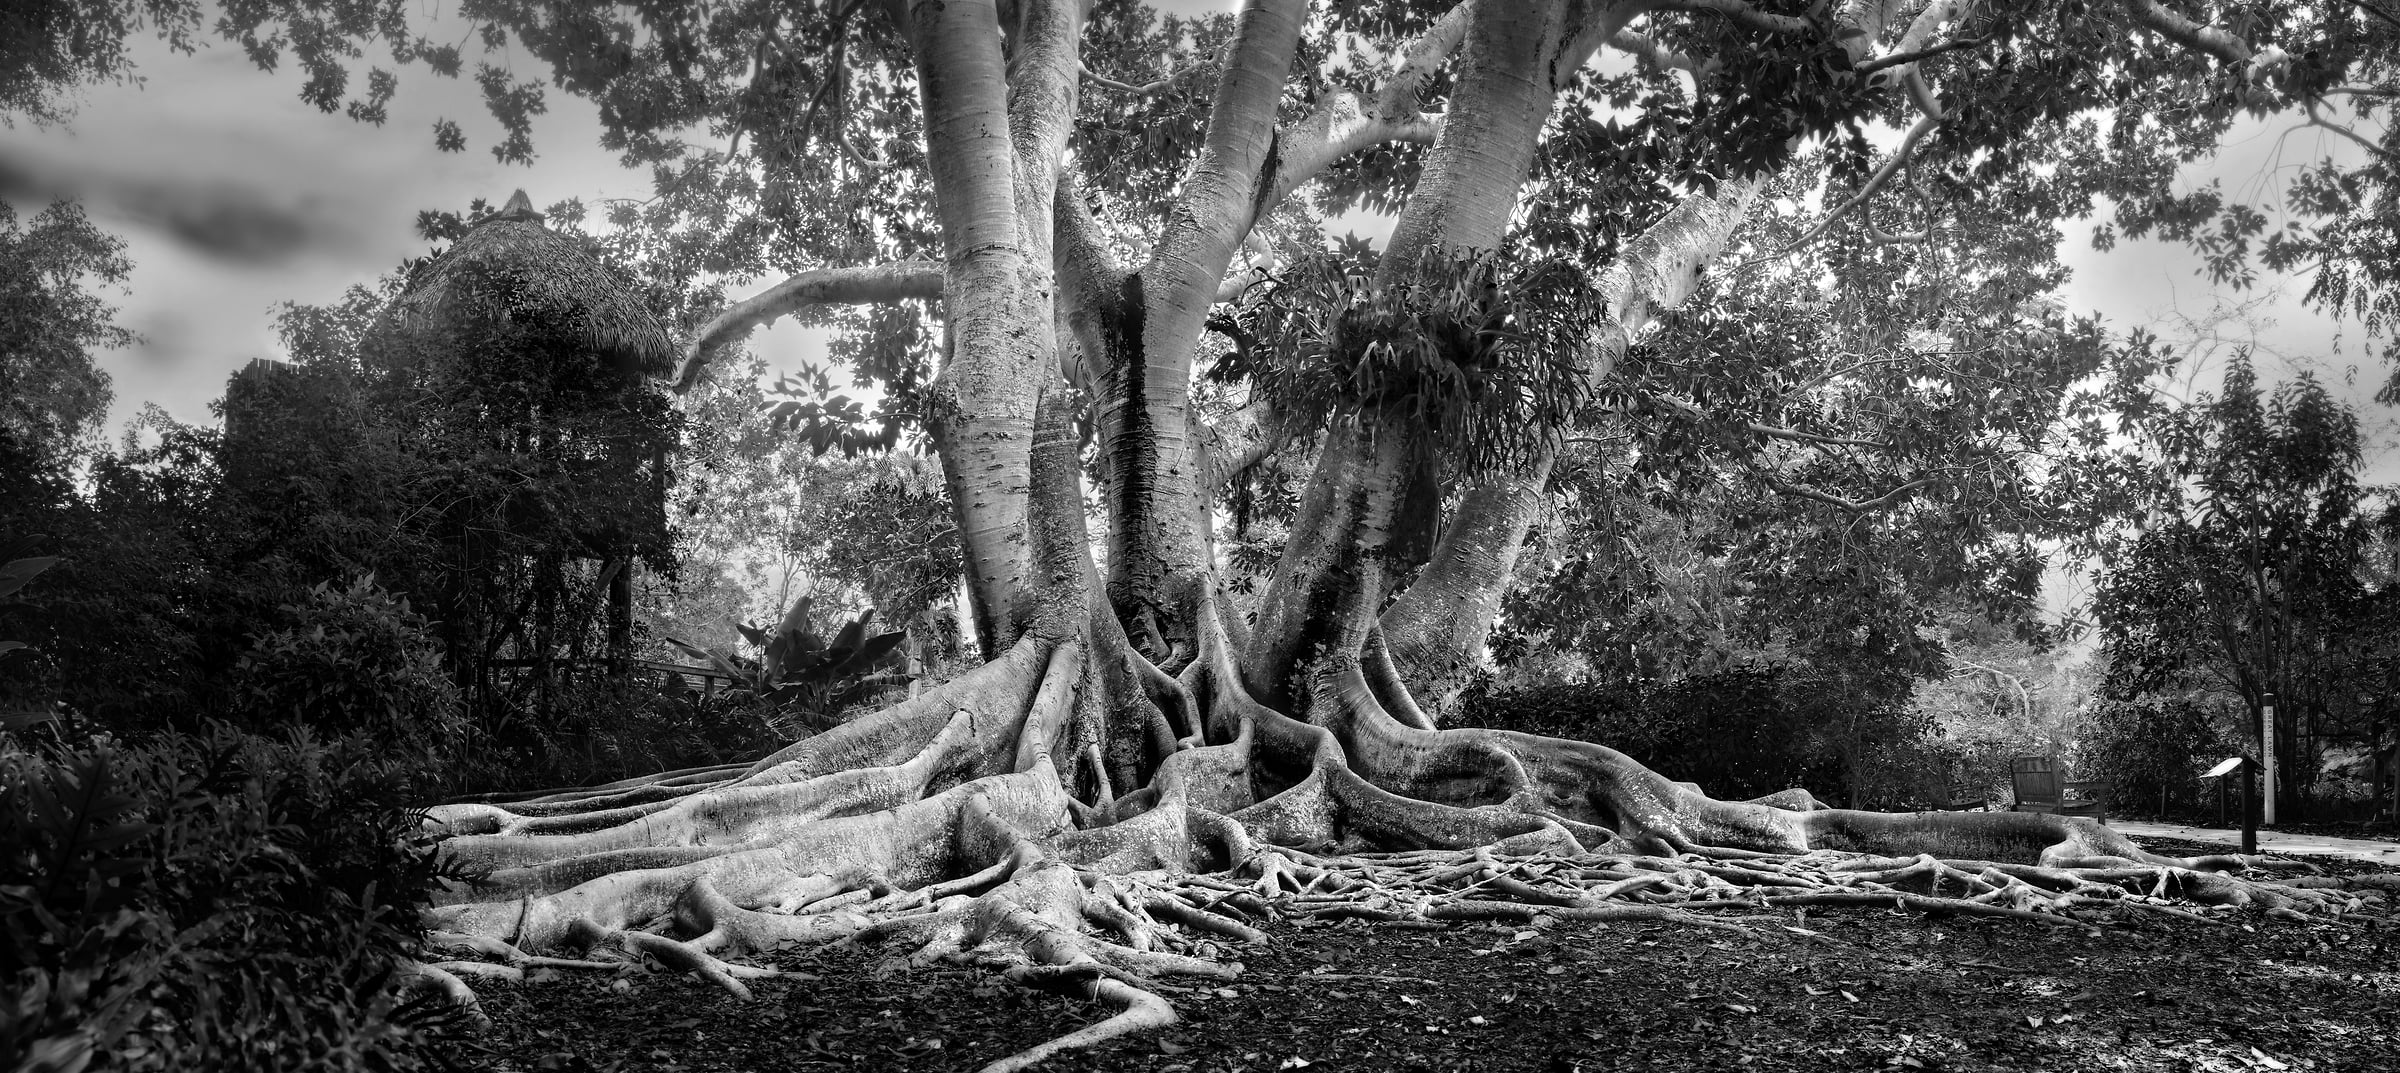 248 megapixels! A very high resolution, large-format VAST photo print of a large tree in the jungle; black & white fine art photograph created by Phil Crawshay at the Marie Selby Botanical Gardens in Sarasota, Florida.